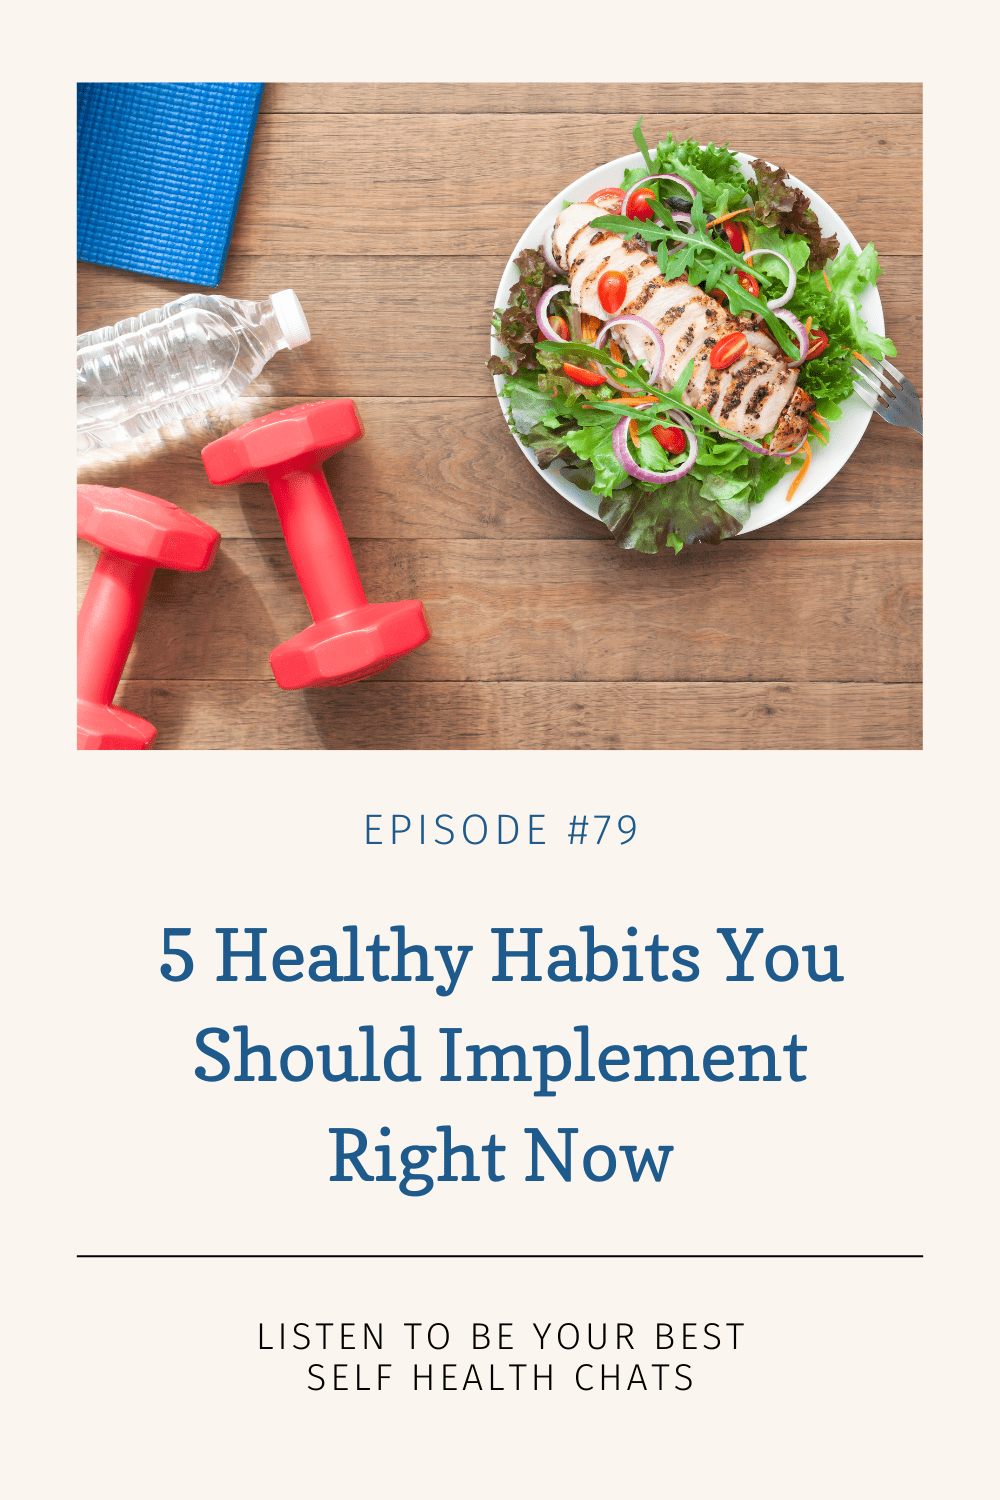 5 Healthy Habits You Should Implement Right Now